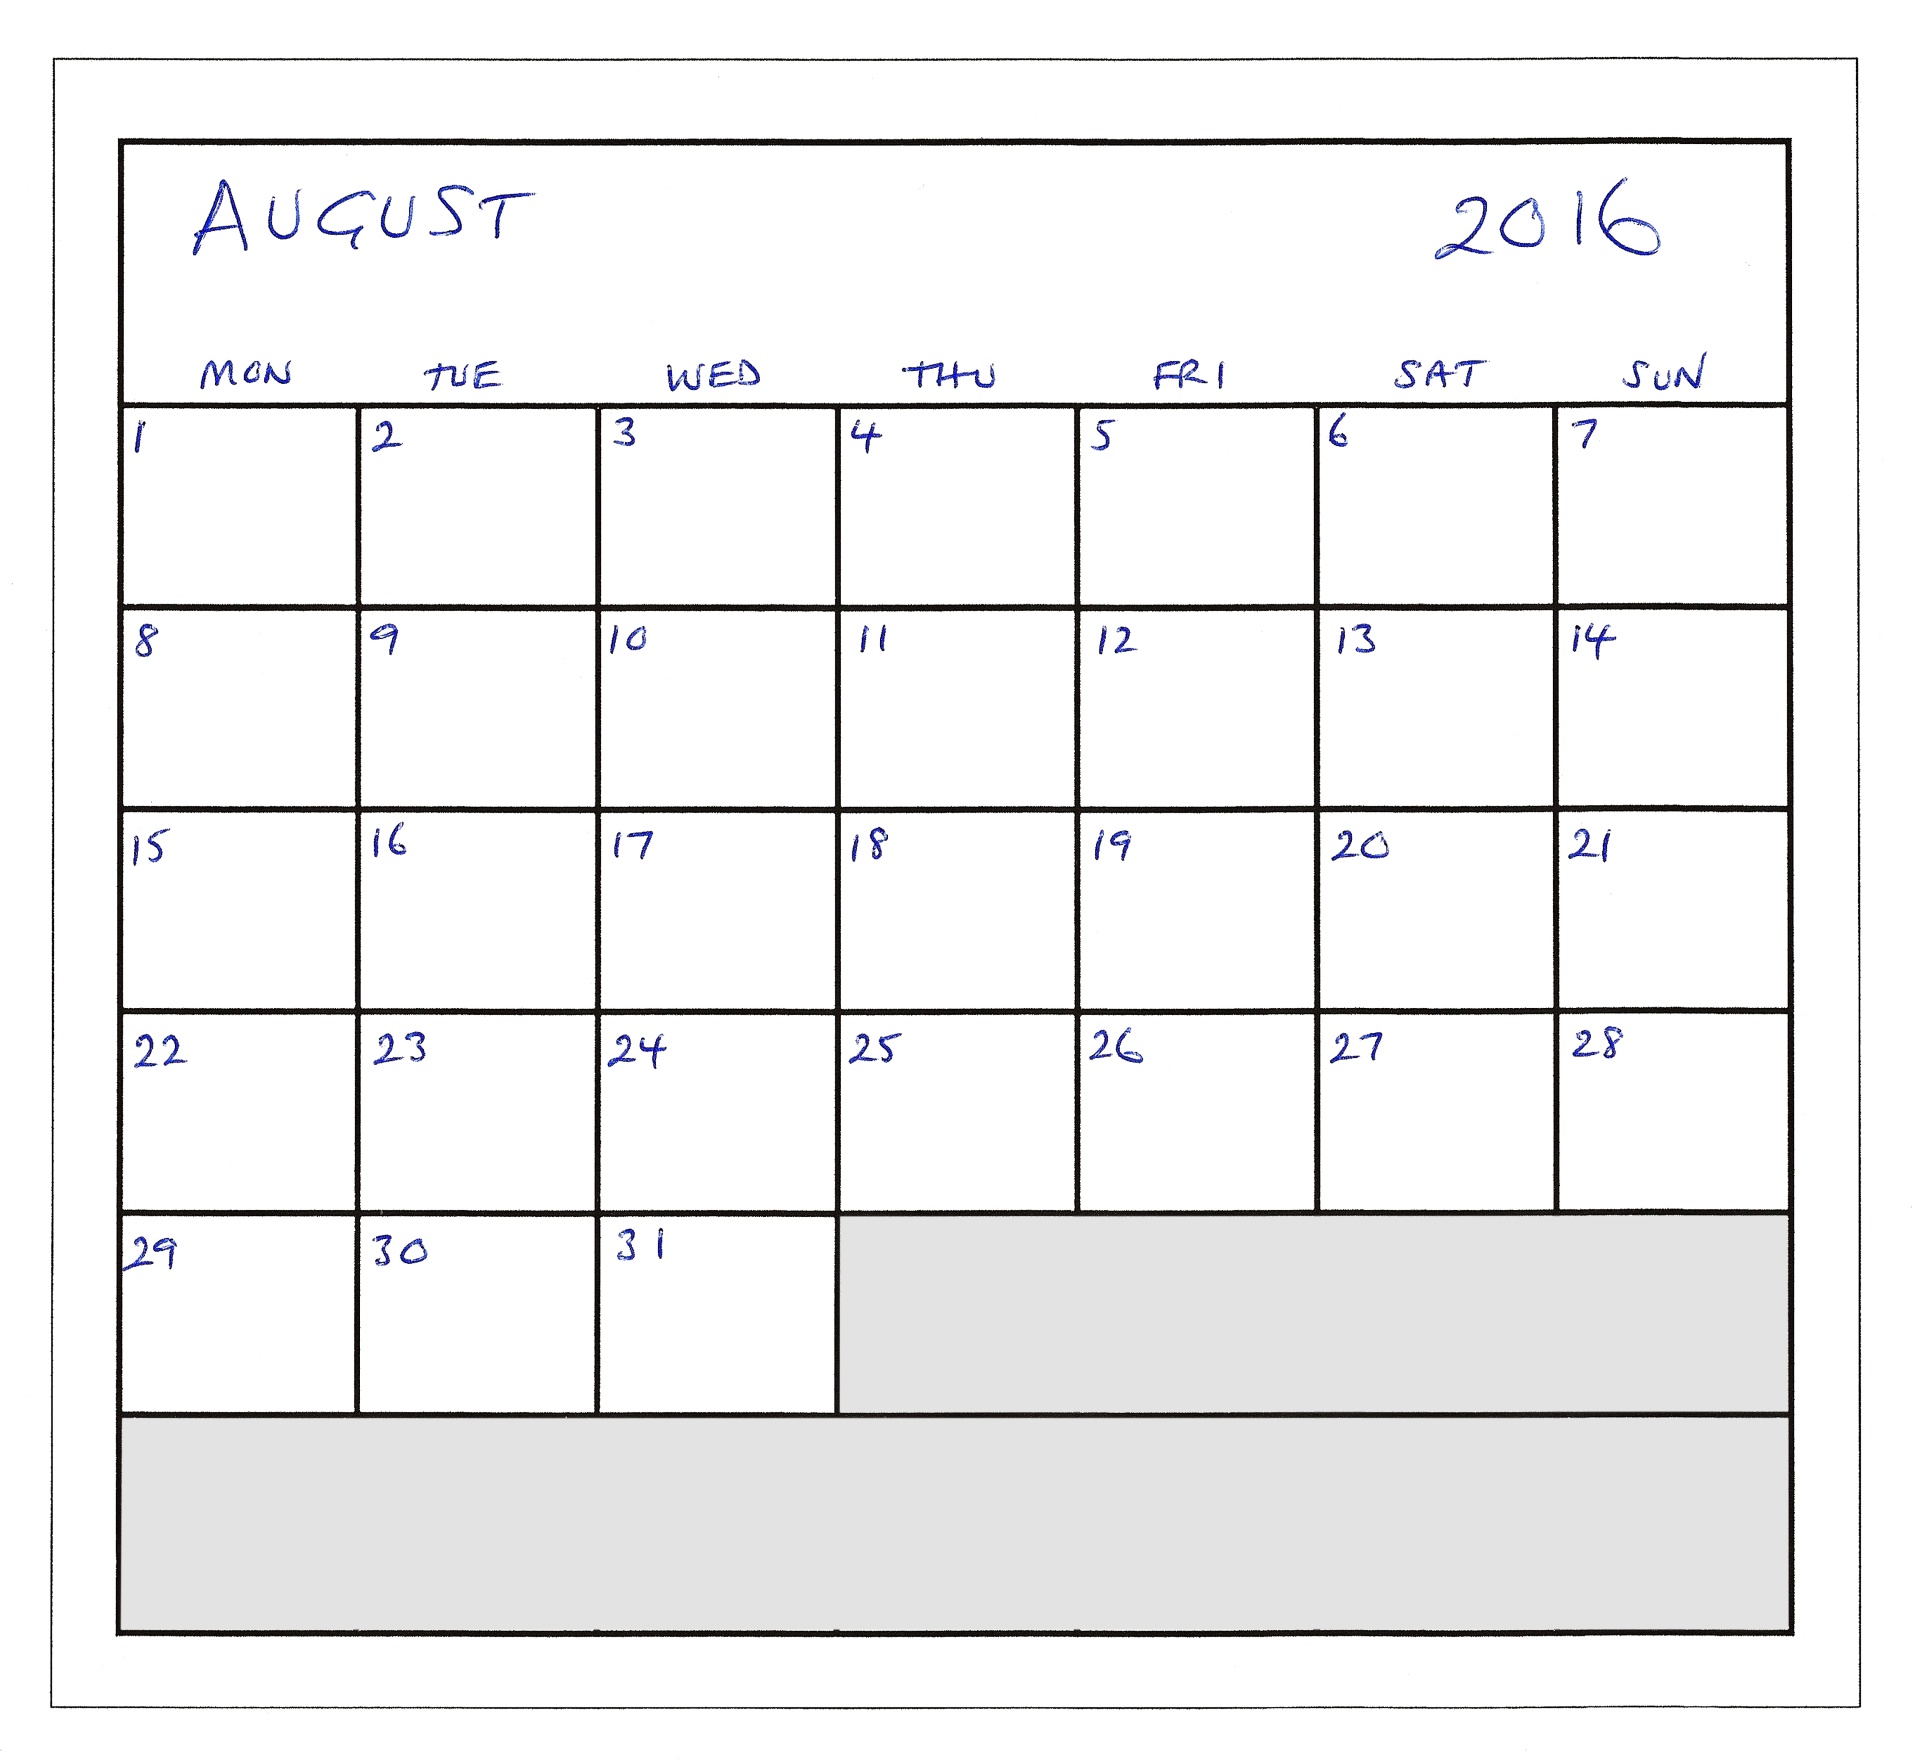 Download Free Photo Of August 16 Calendar Day Planner Freehand From Needpix Com